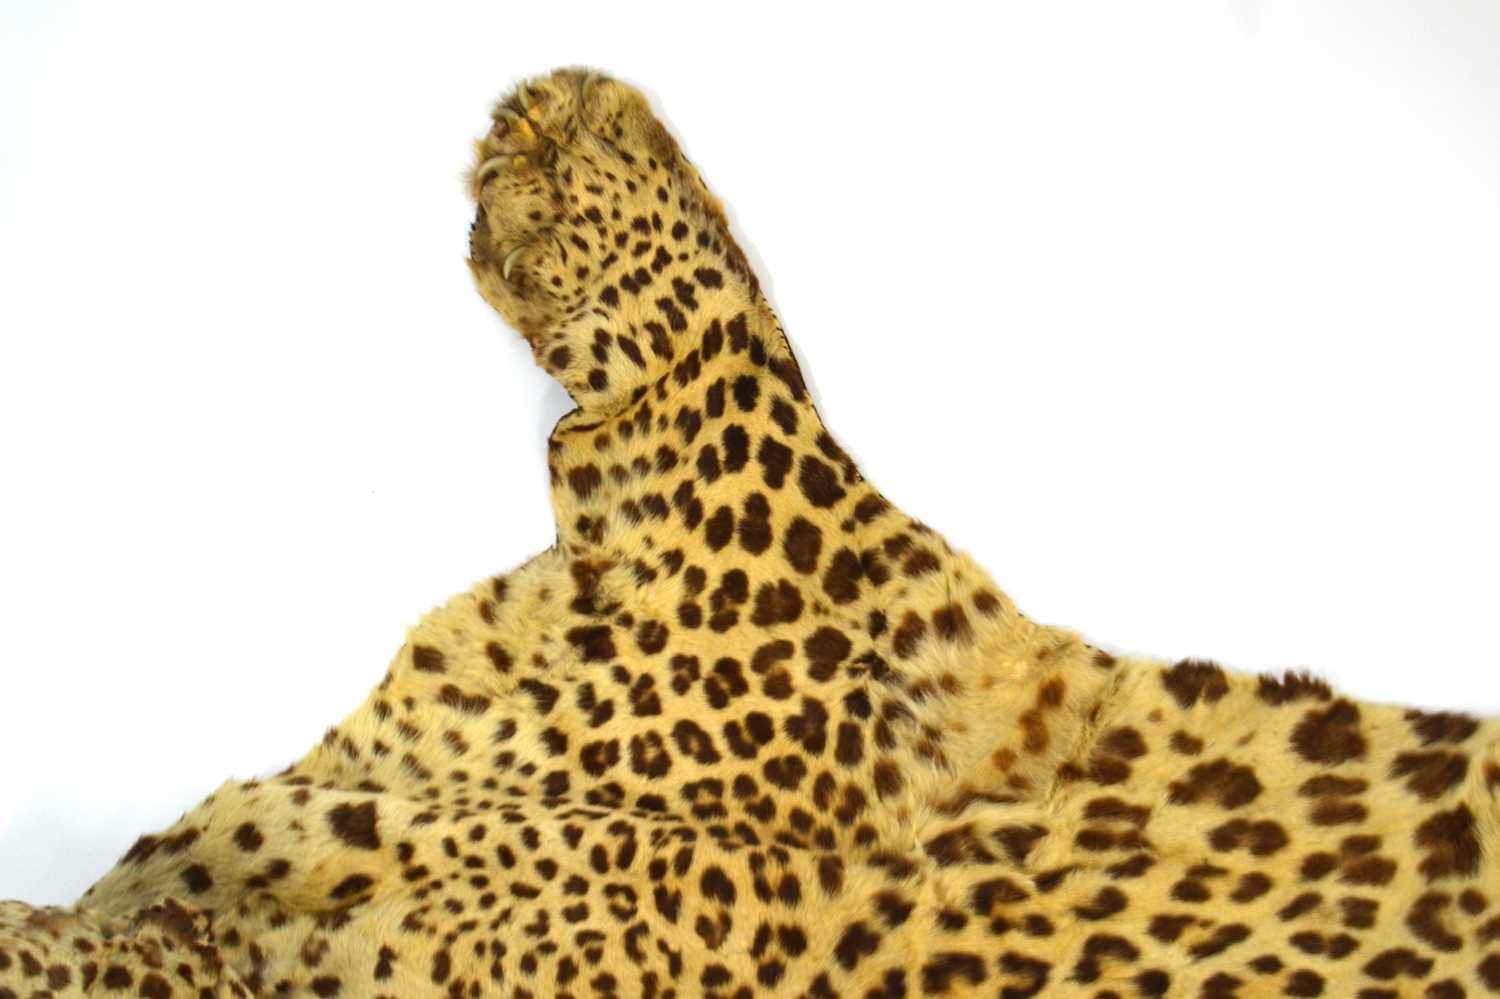 20th Century taxidermy leopard skin rug and mount, open gaping mouth head with glass eyes, by - Image 9 of 11